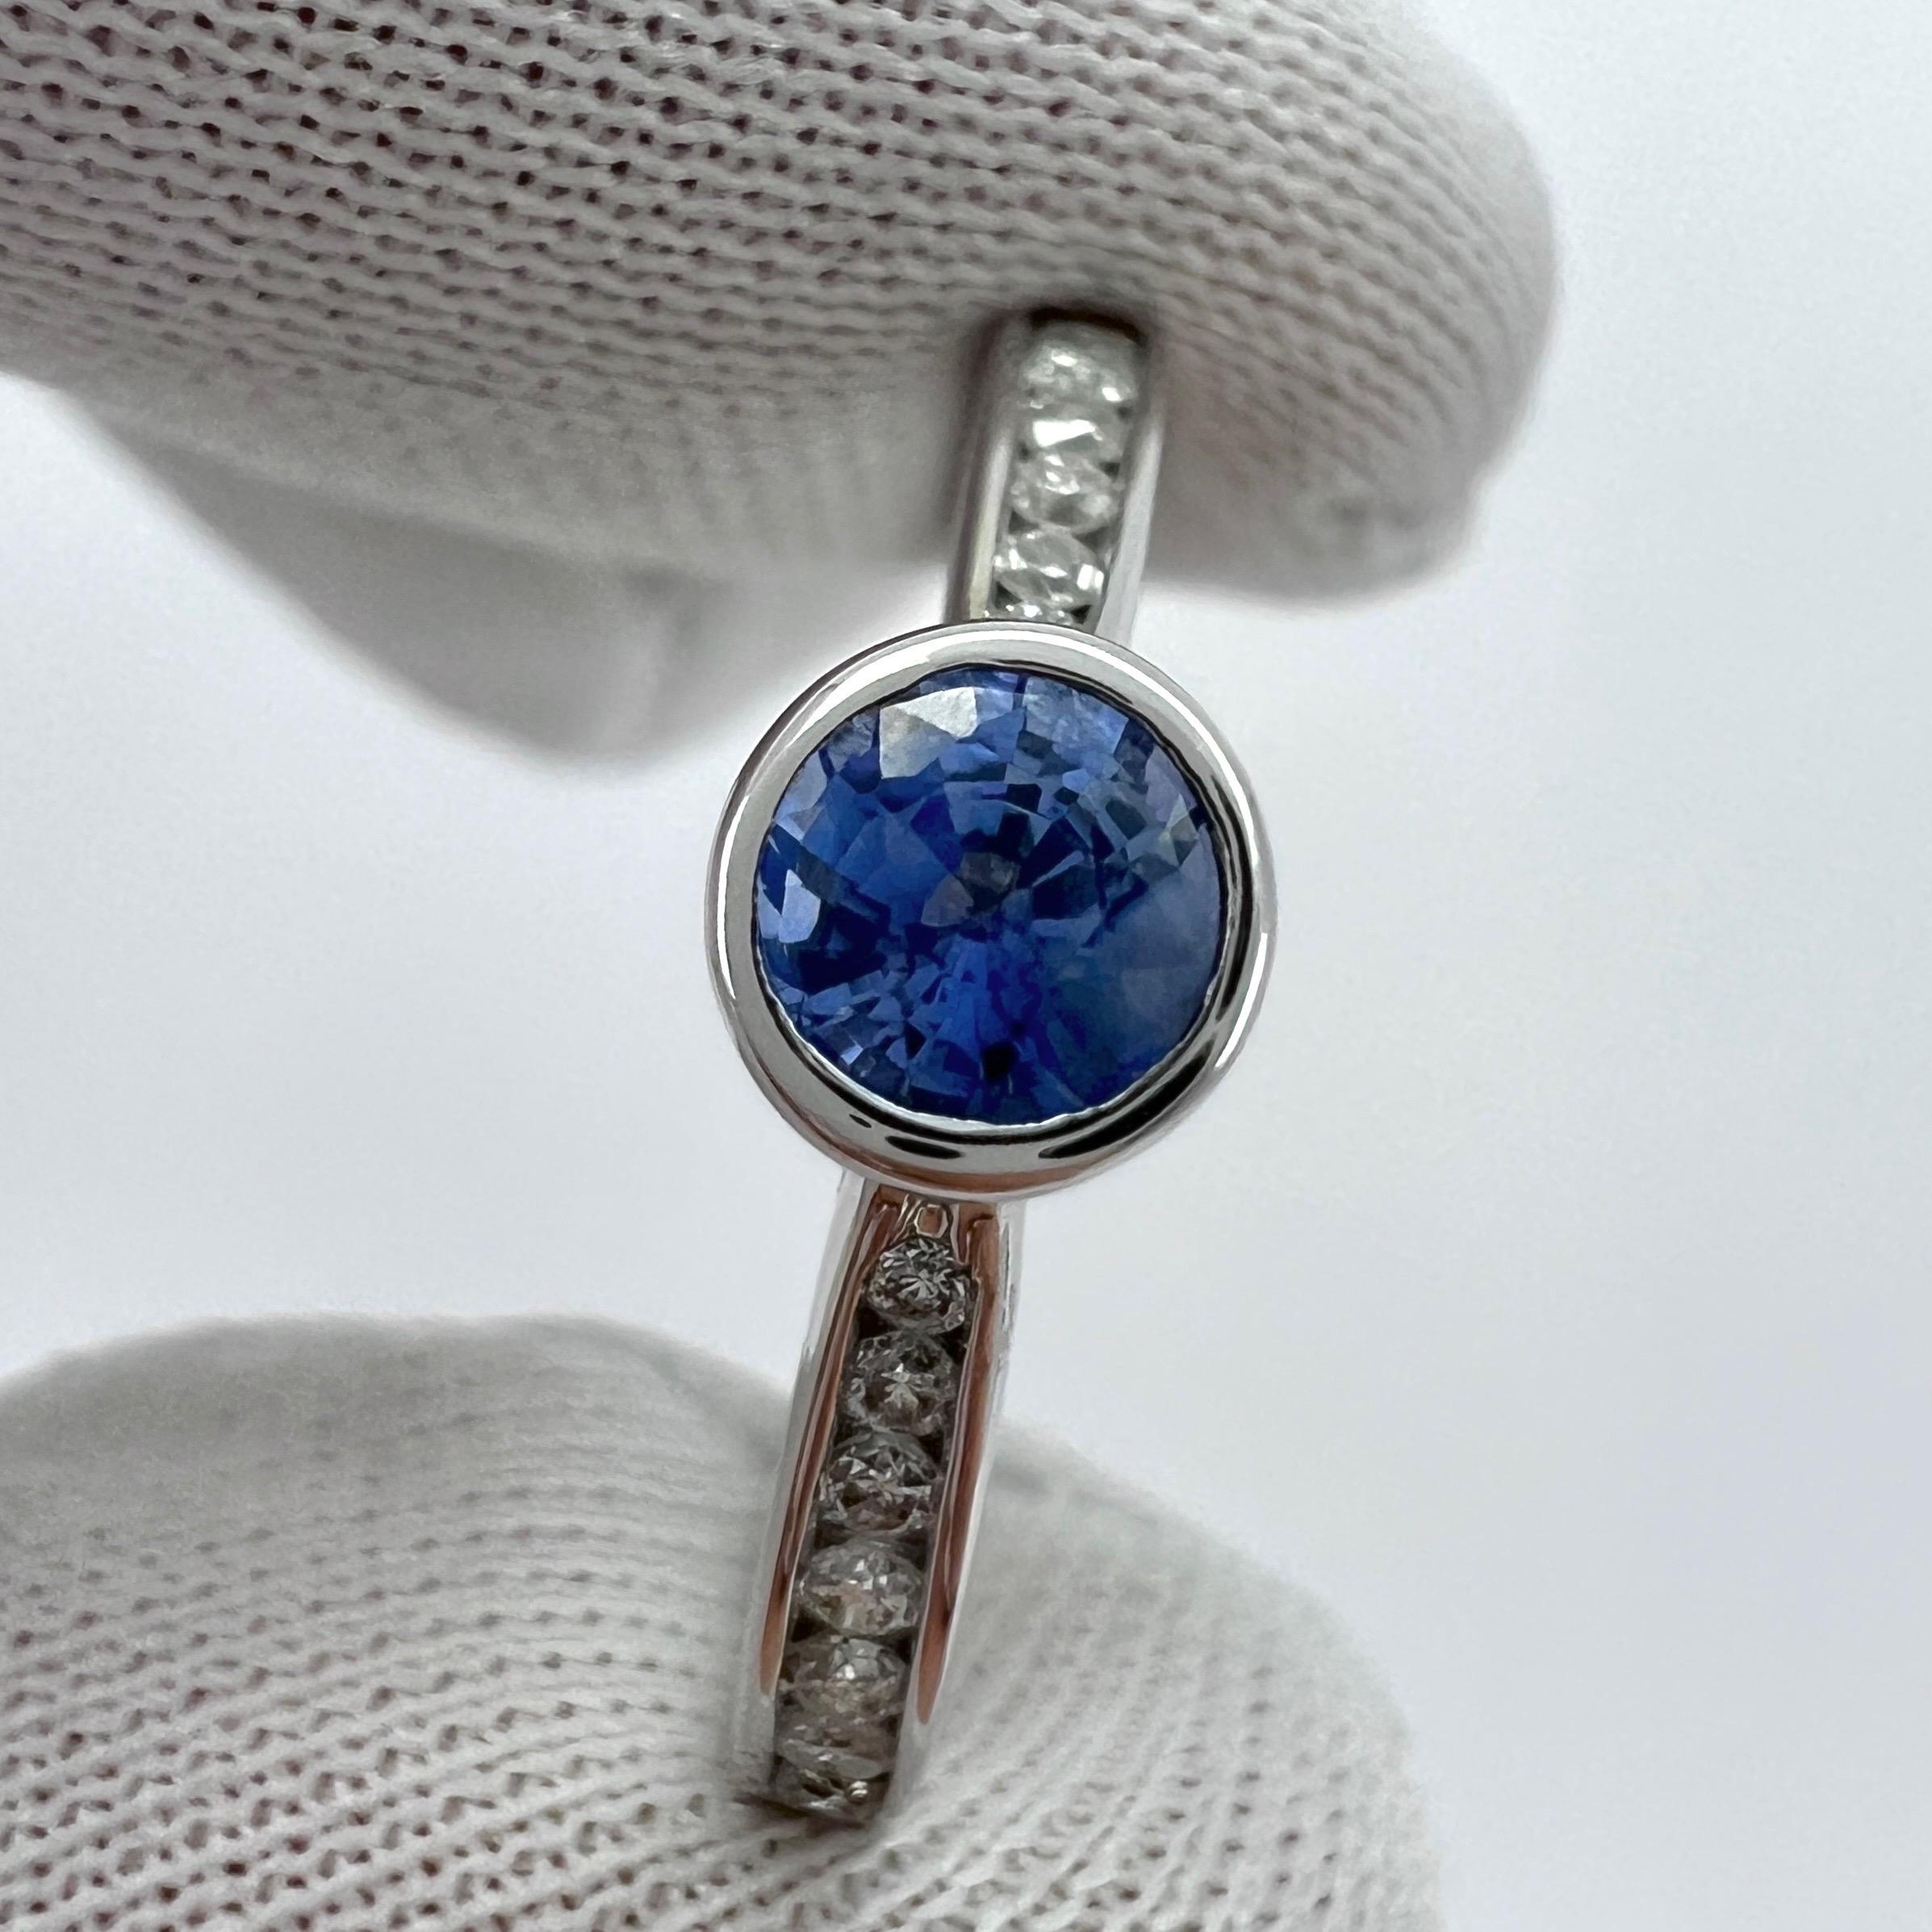 Vivid Light Blue Round Cut Natural Ceylon Sapphire And Diamond White Gold Bezel Rubover Ring.

0.60 Carat total. This ring features a beautiful vivid light blue Ceylon sapphire stone with a bright blue colour and excellent cut and good clarity. Some